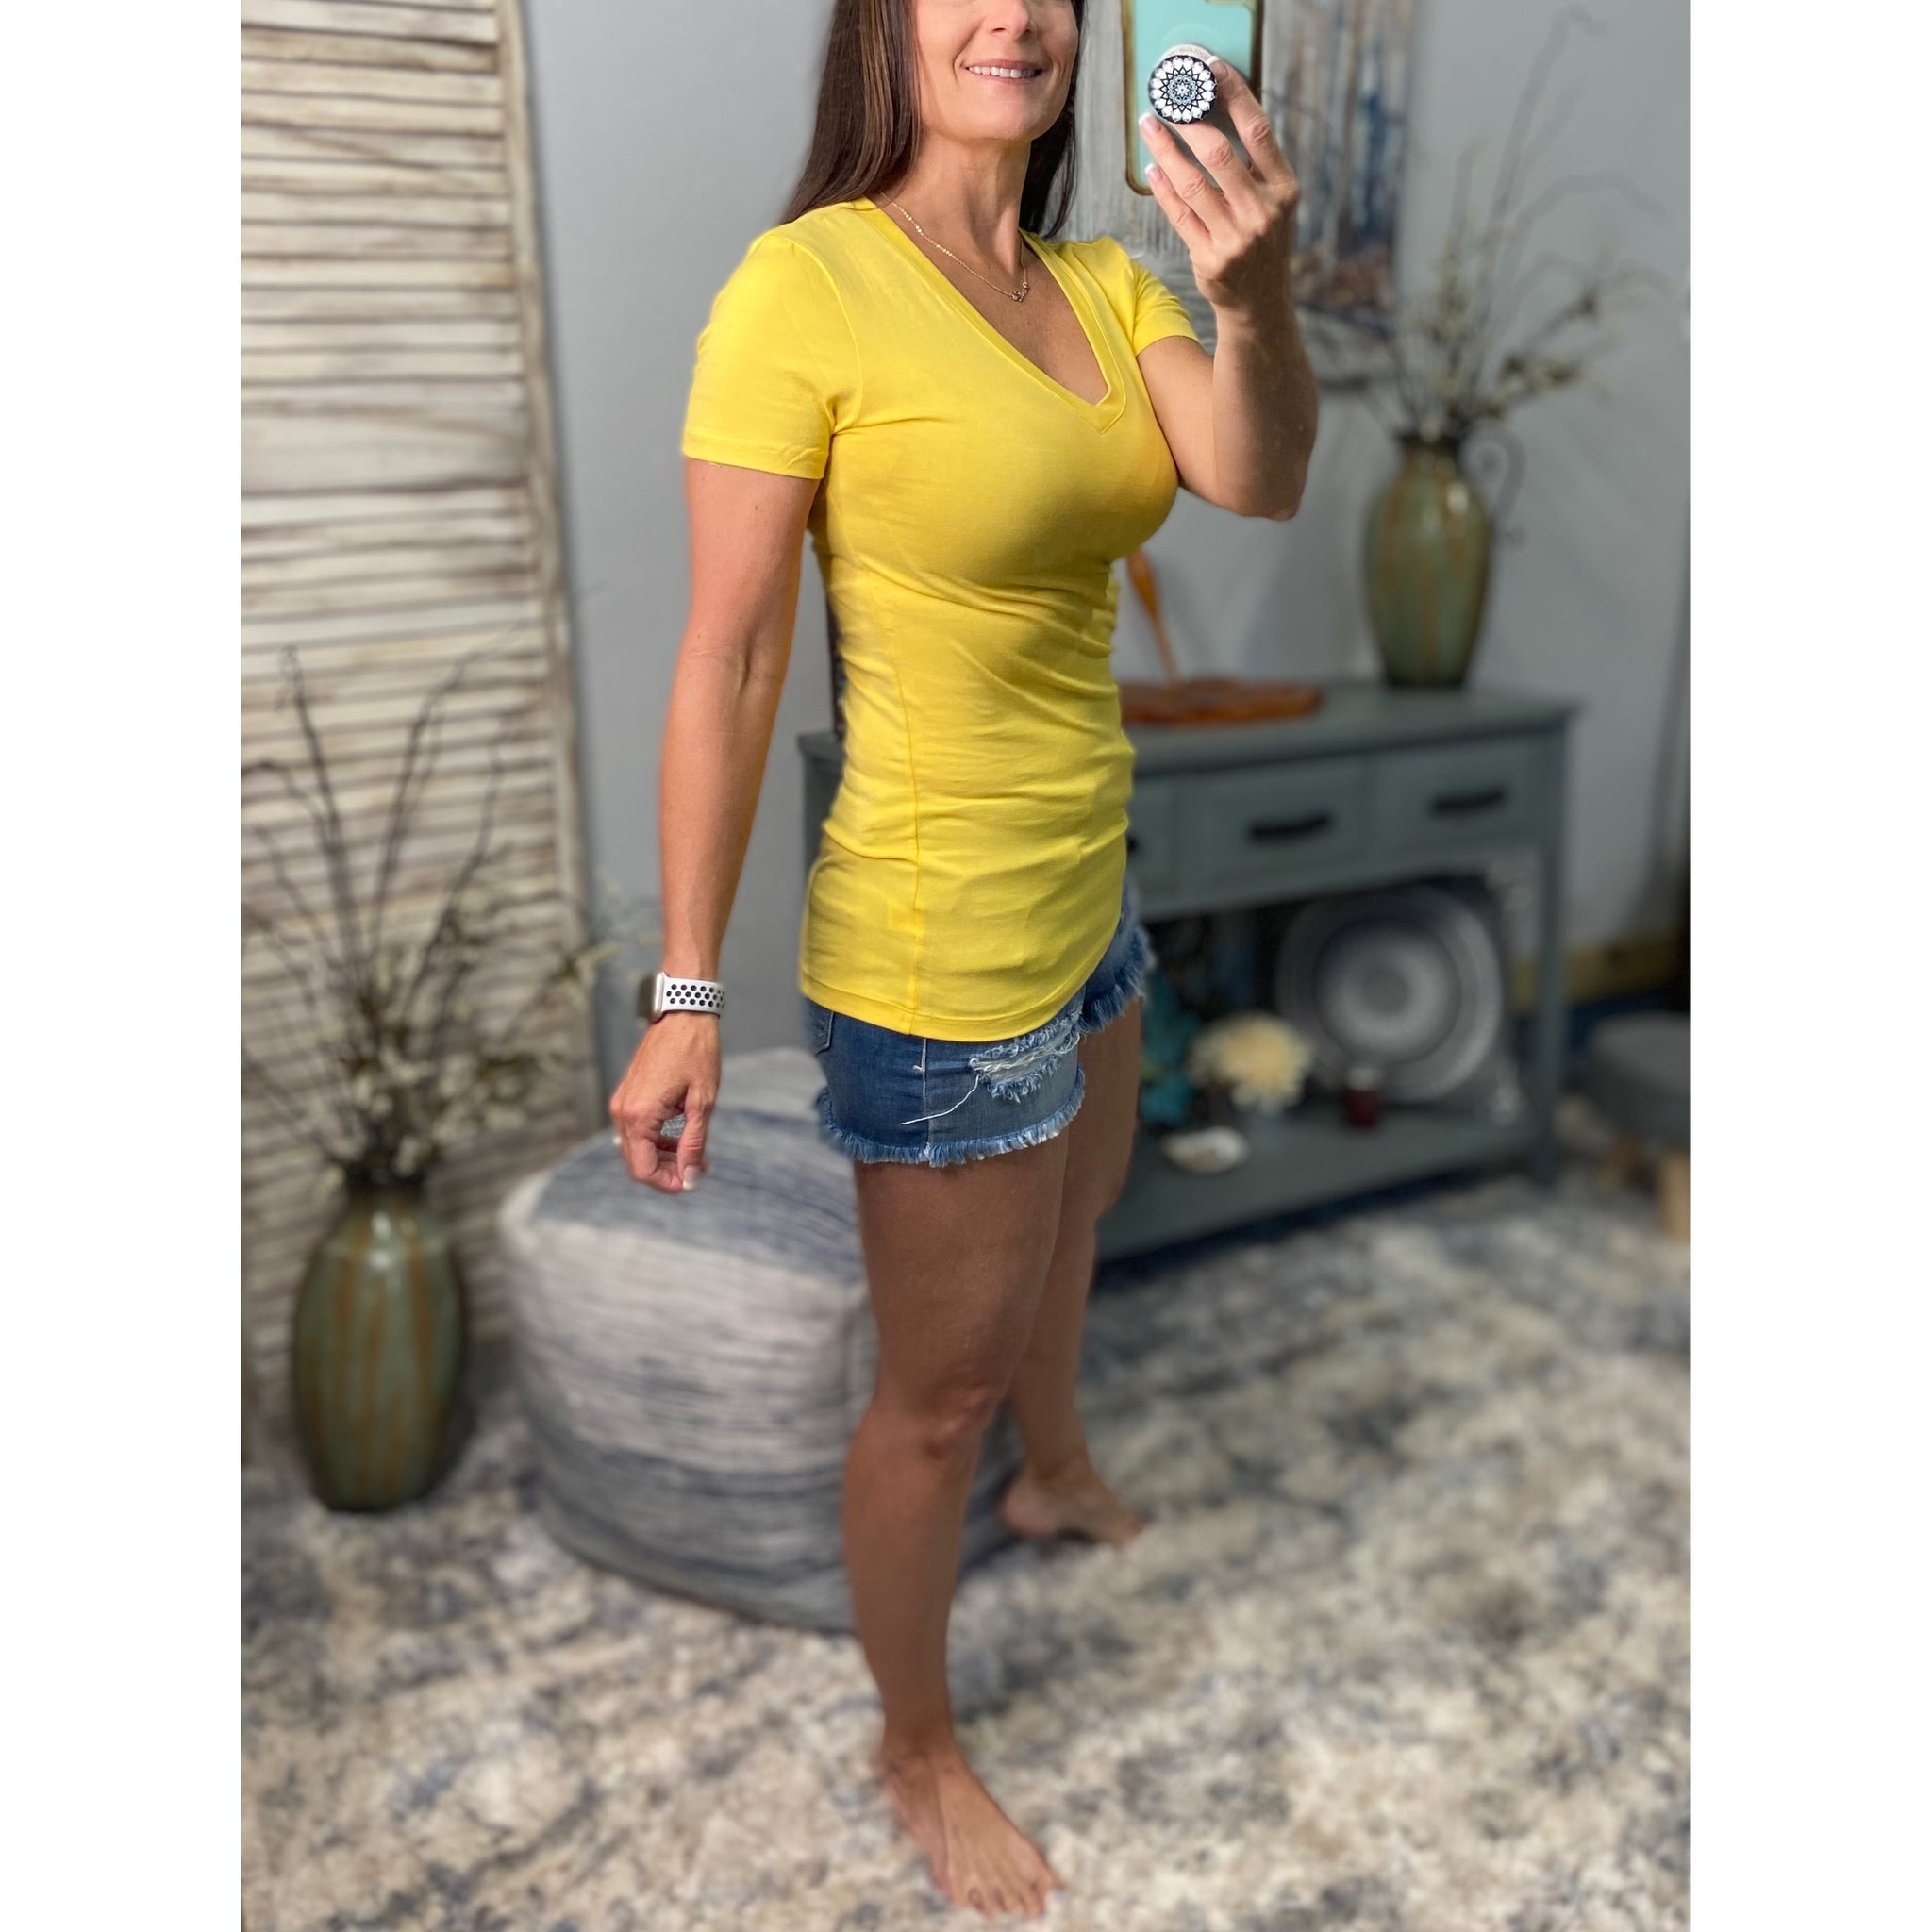 "Basic Babe" Low Cut V-Neck Cleavage Baby Slimming Basic Tee Shirt Yellow S/M/L/XL